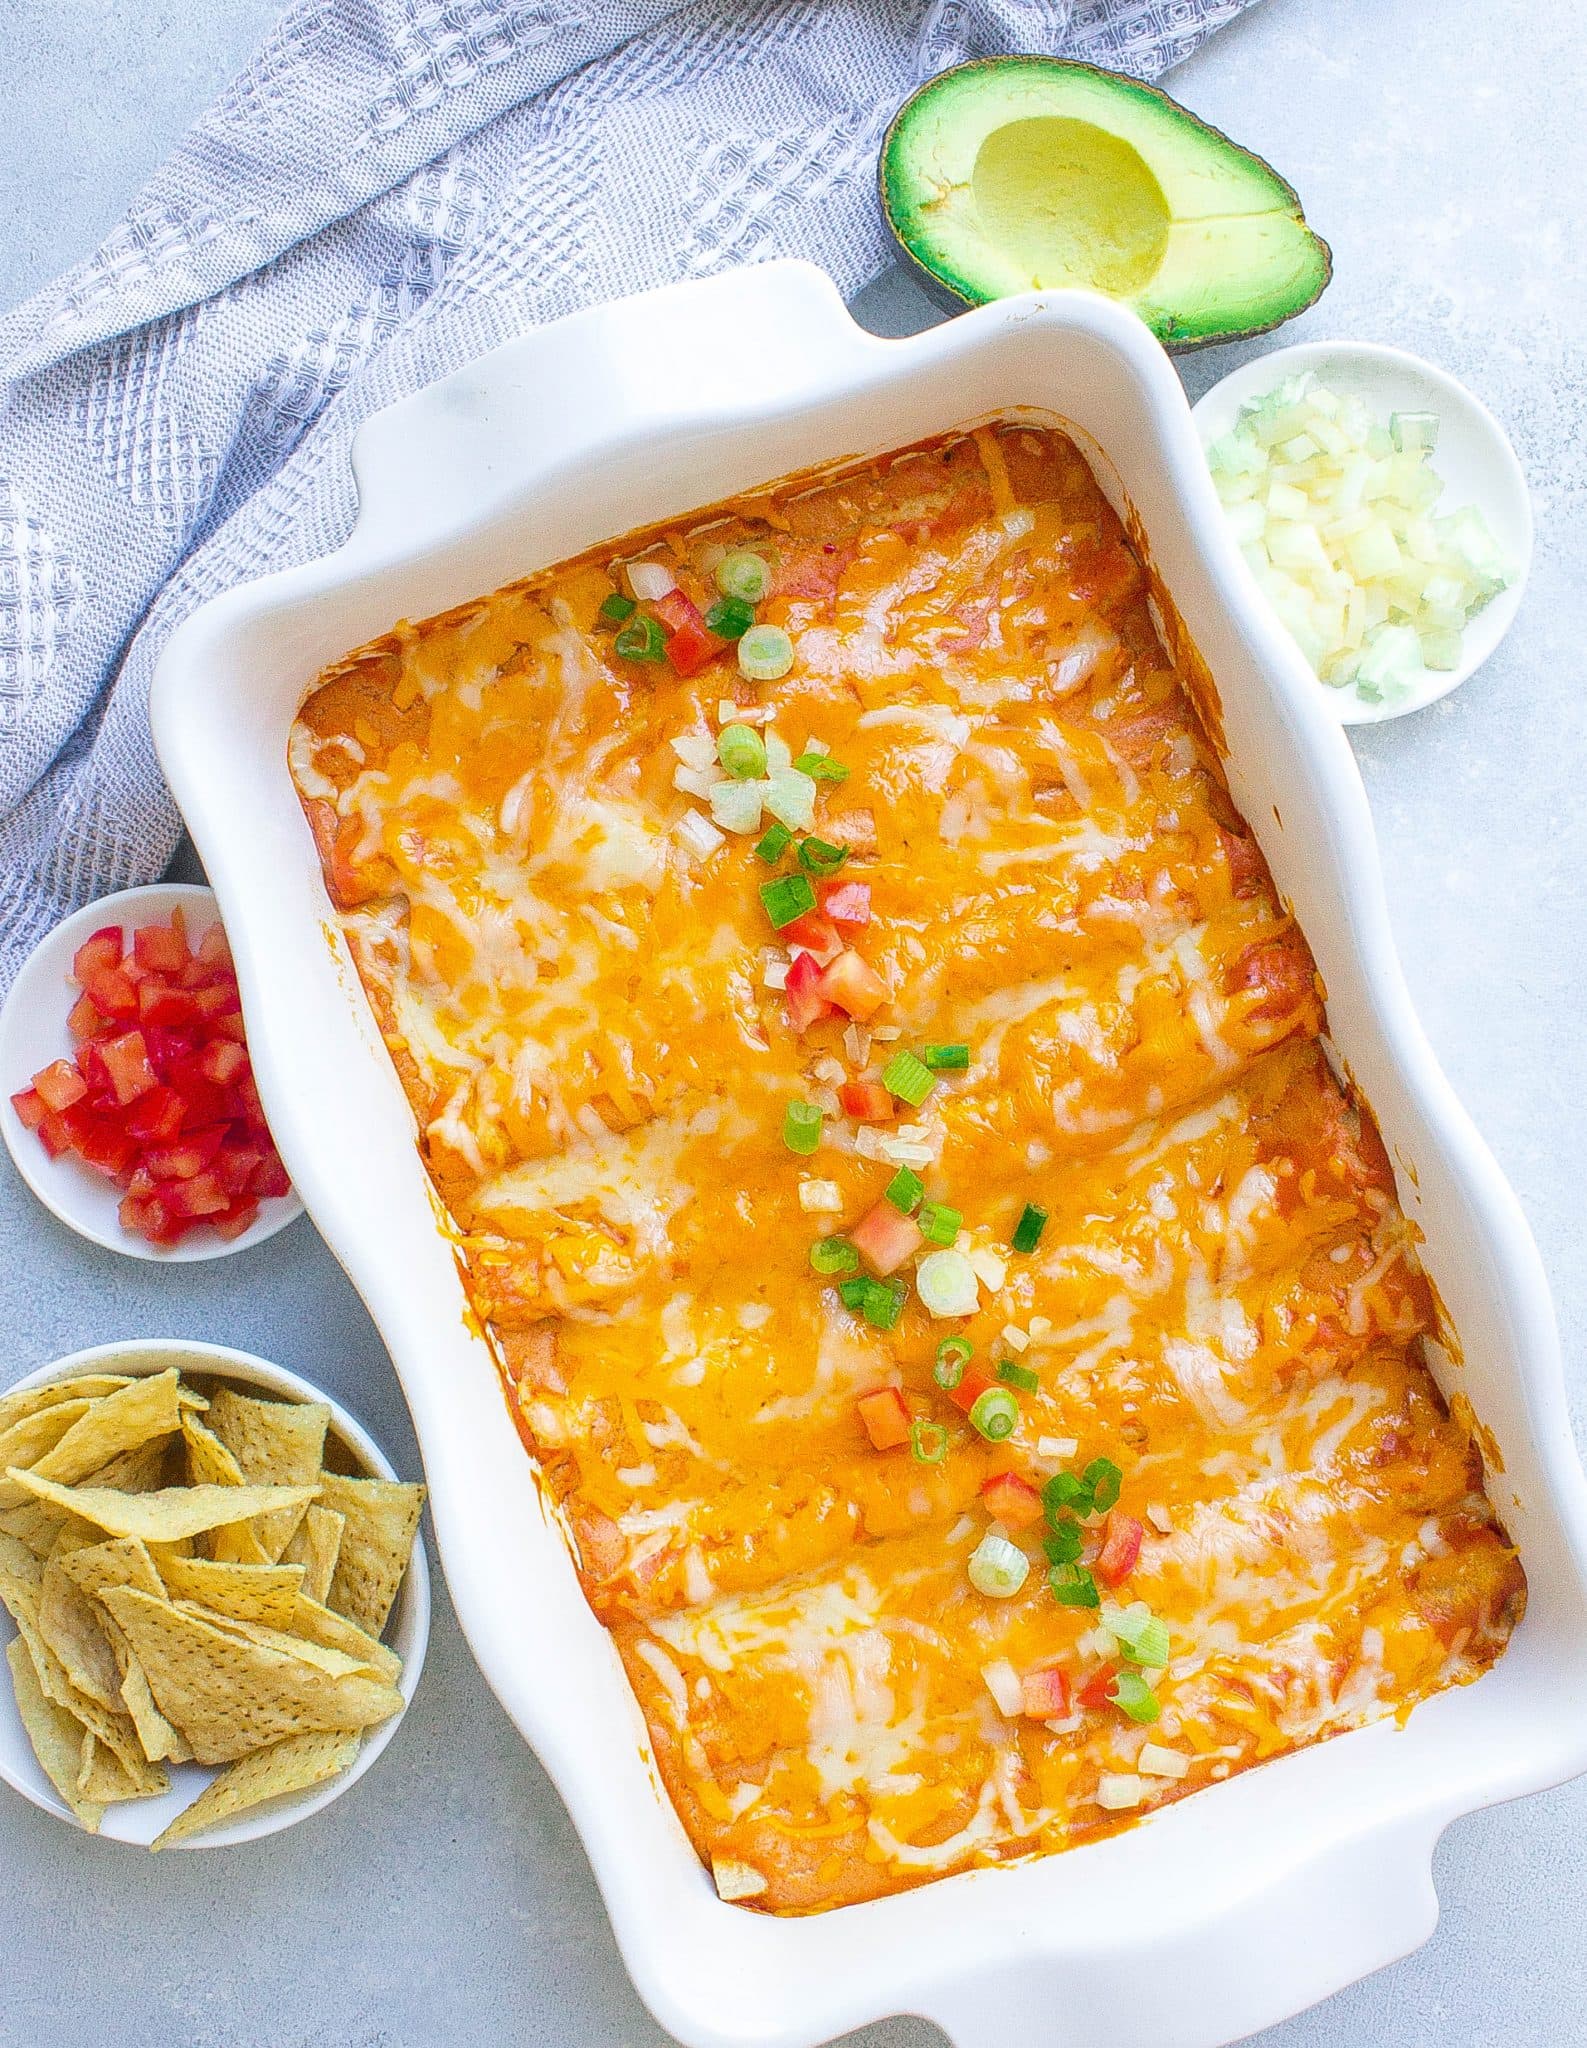 THE BEST Cheese Enchilada Recipe (Easy & Made In 30 Minutes)